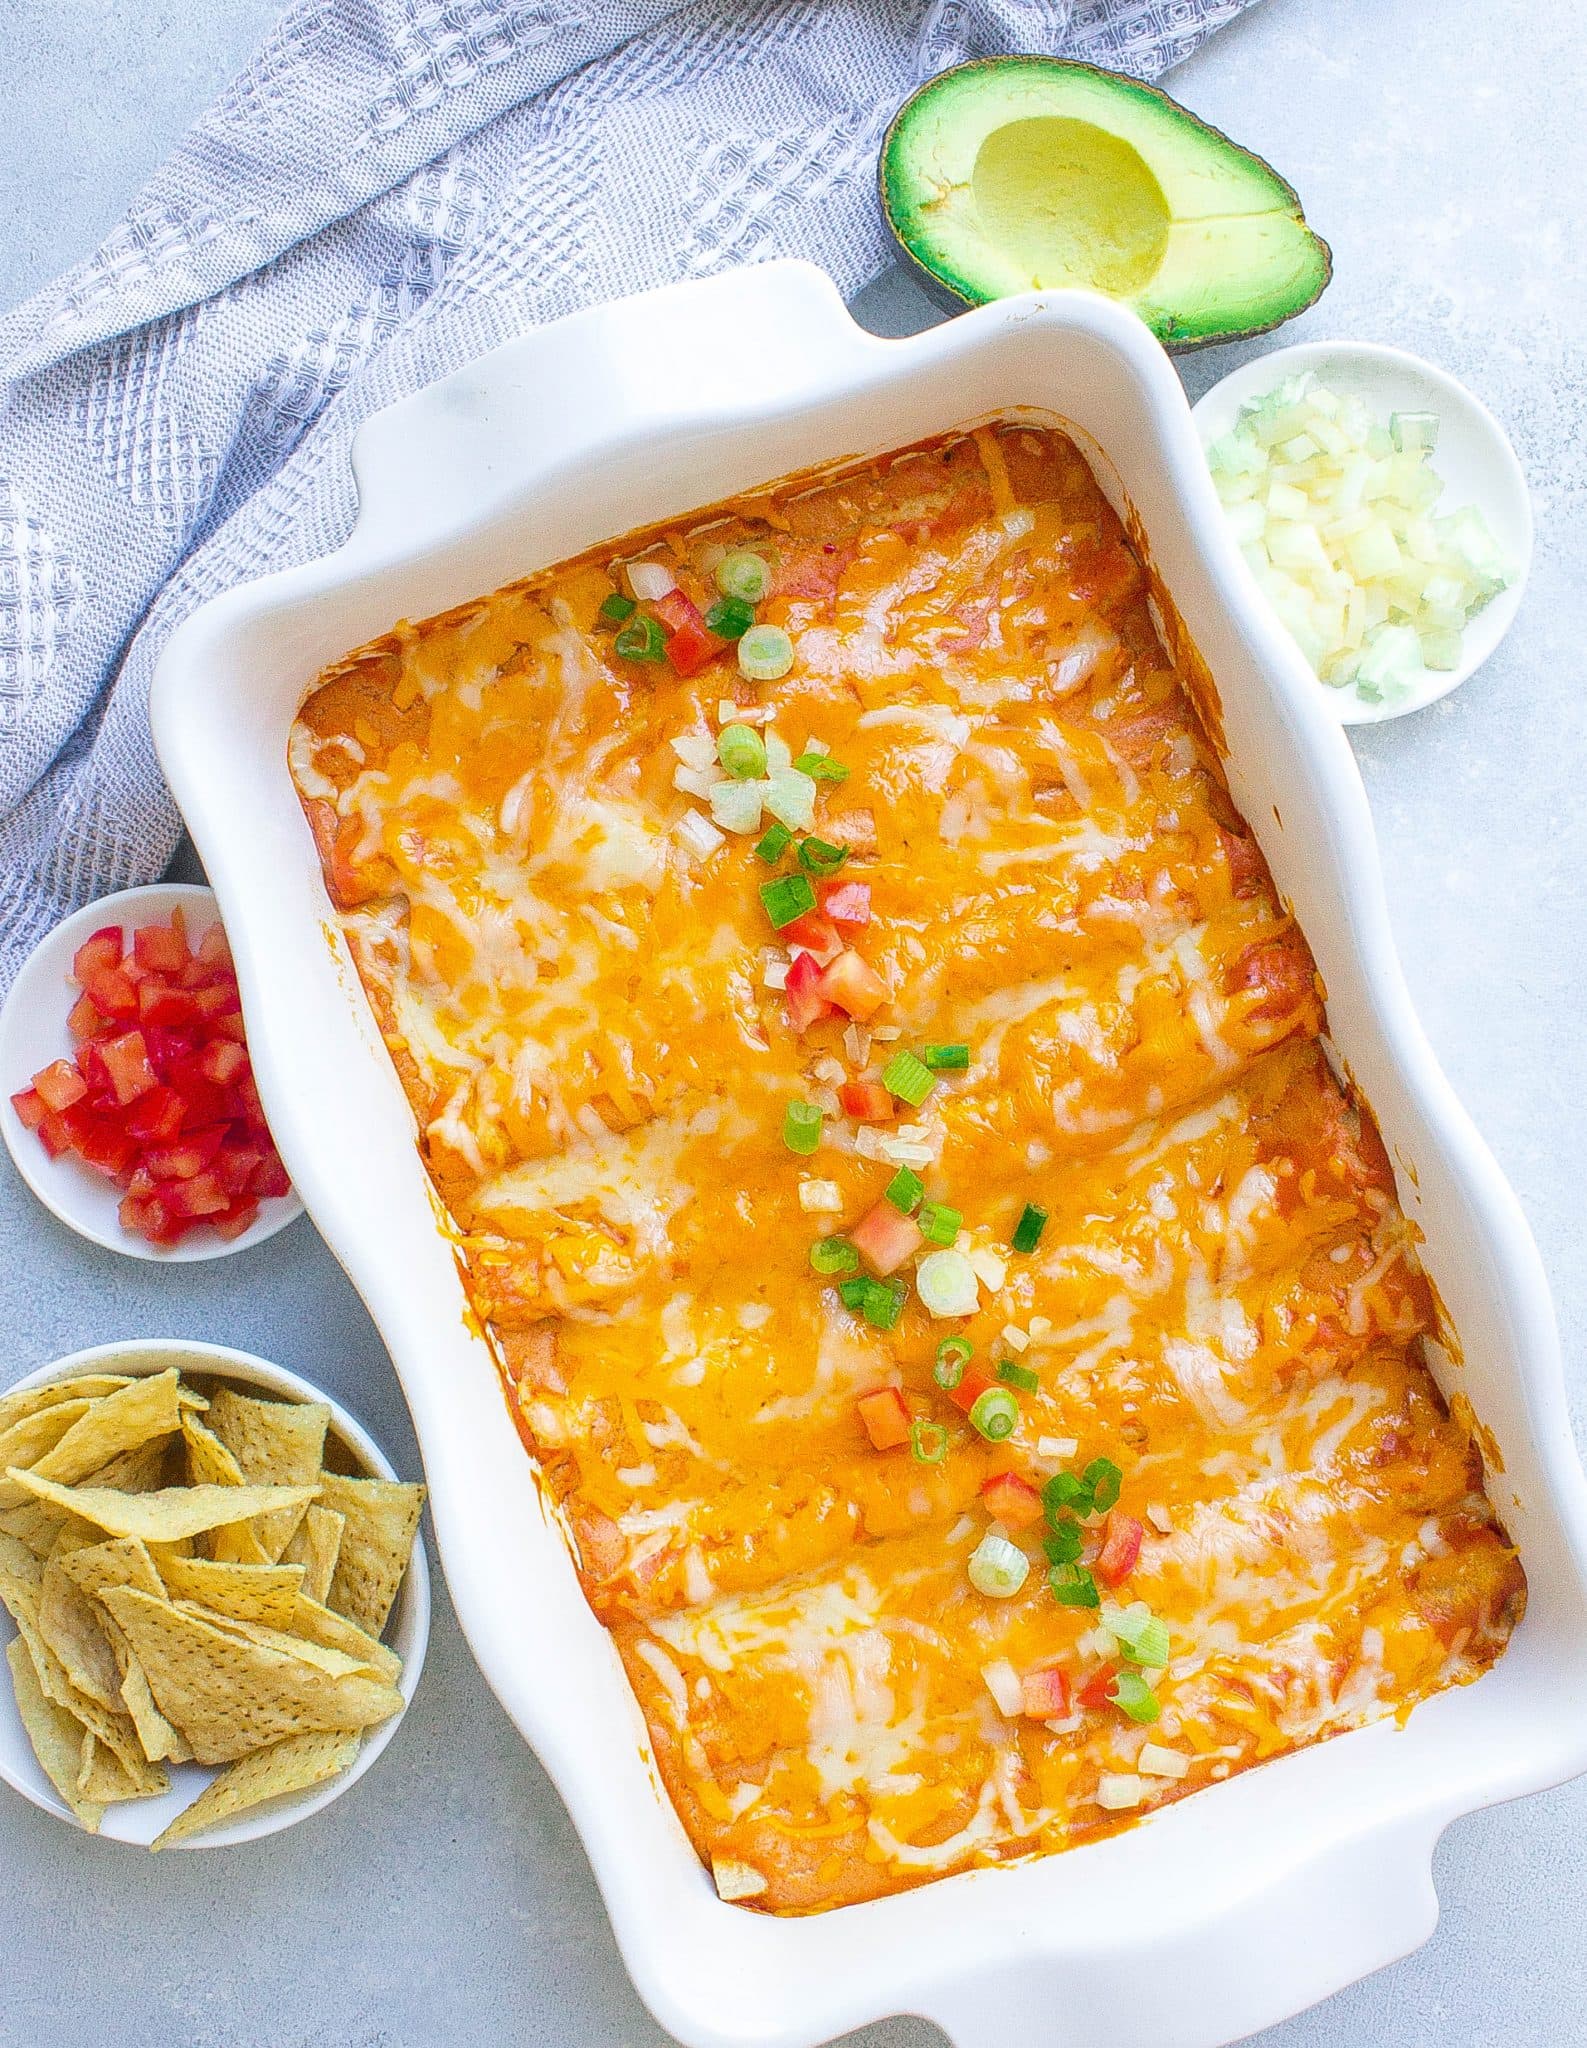 THE BEST Cheese Enchilada Recipe (Easy & Made In 30 Minutes)